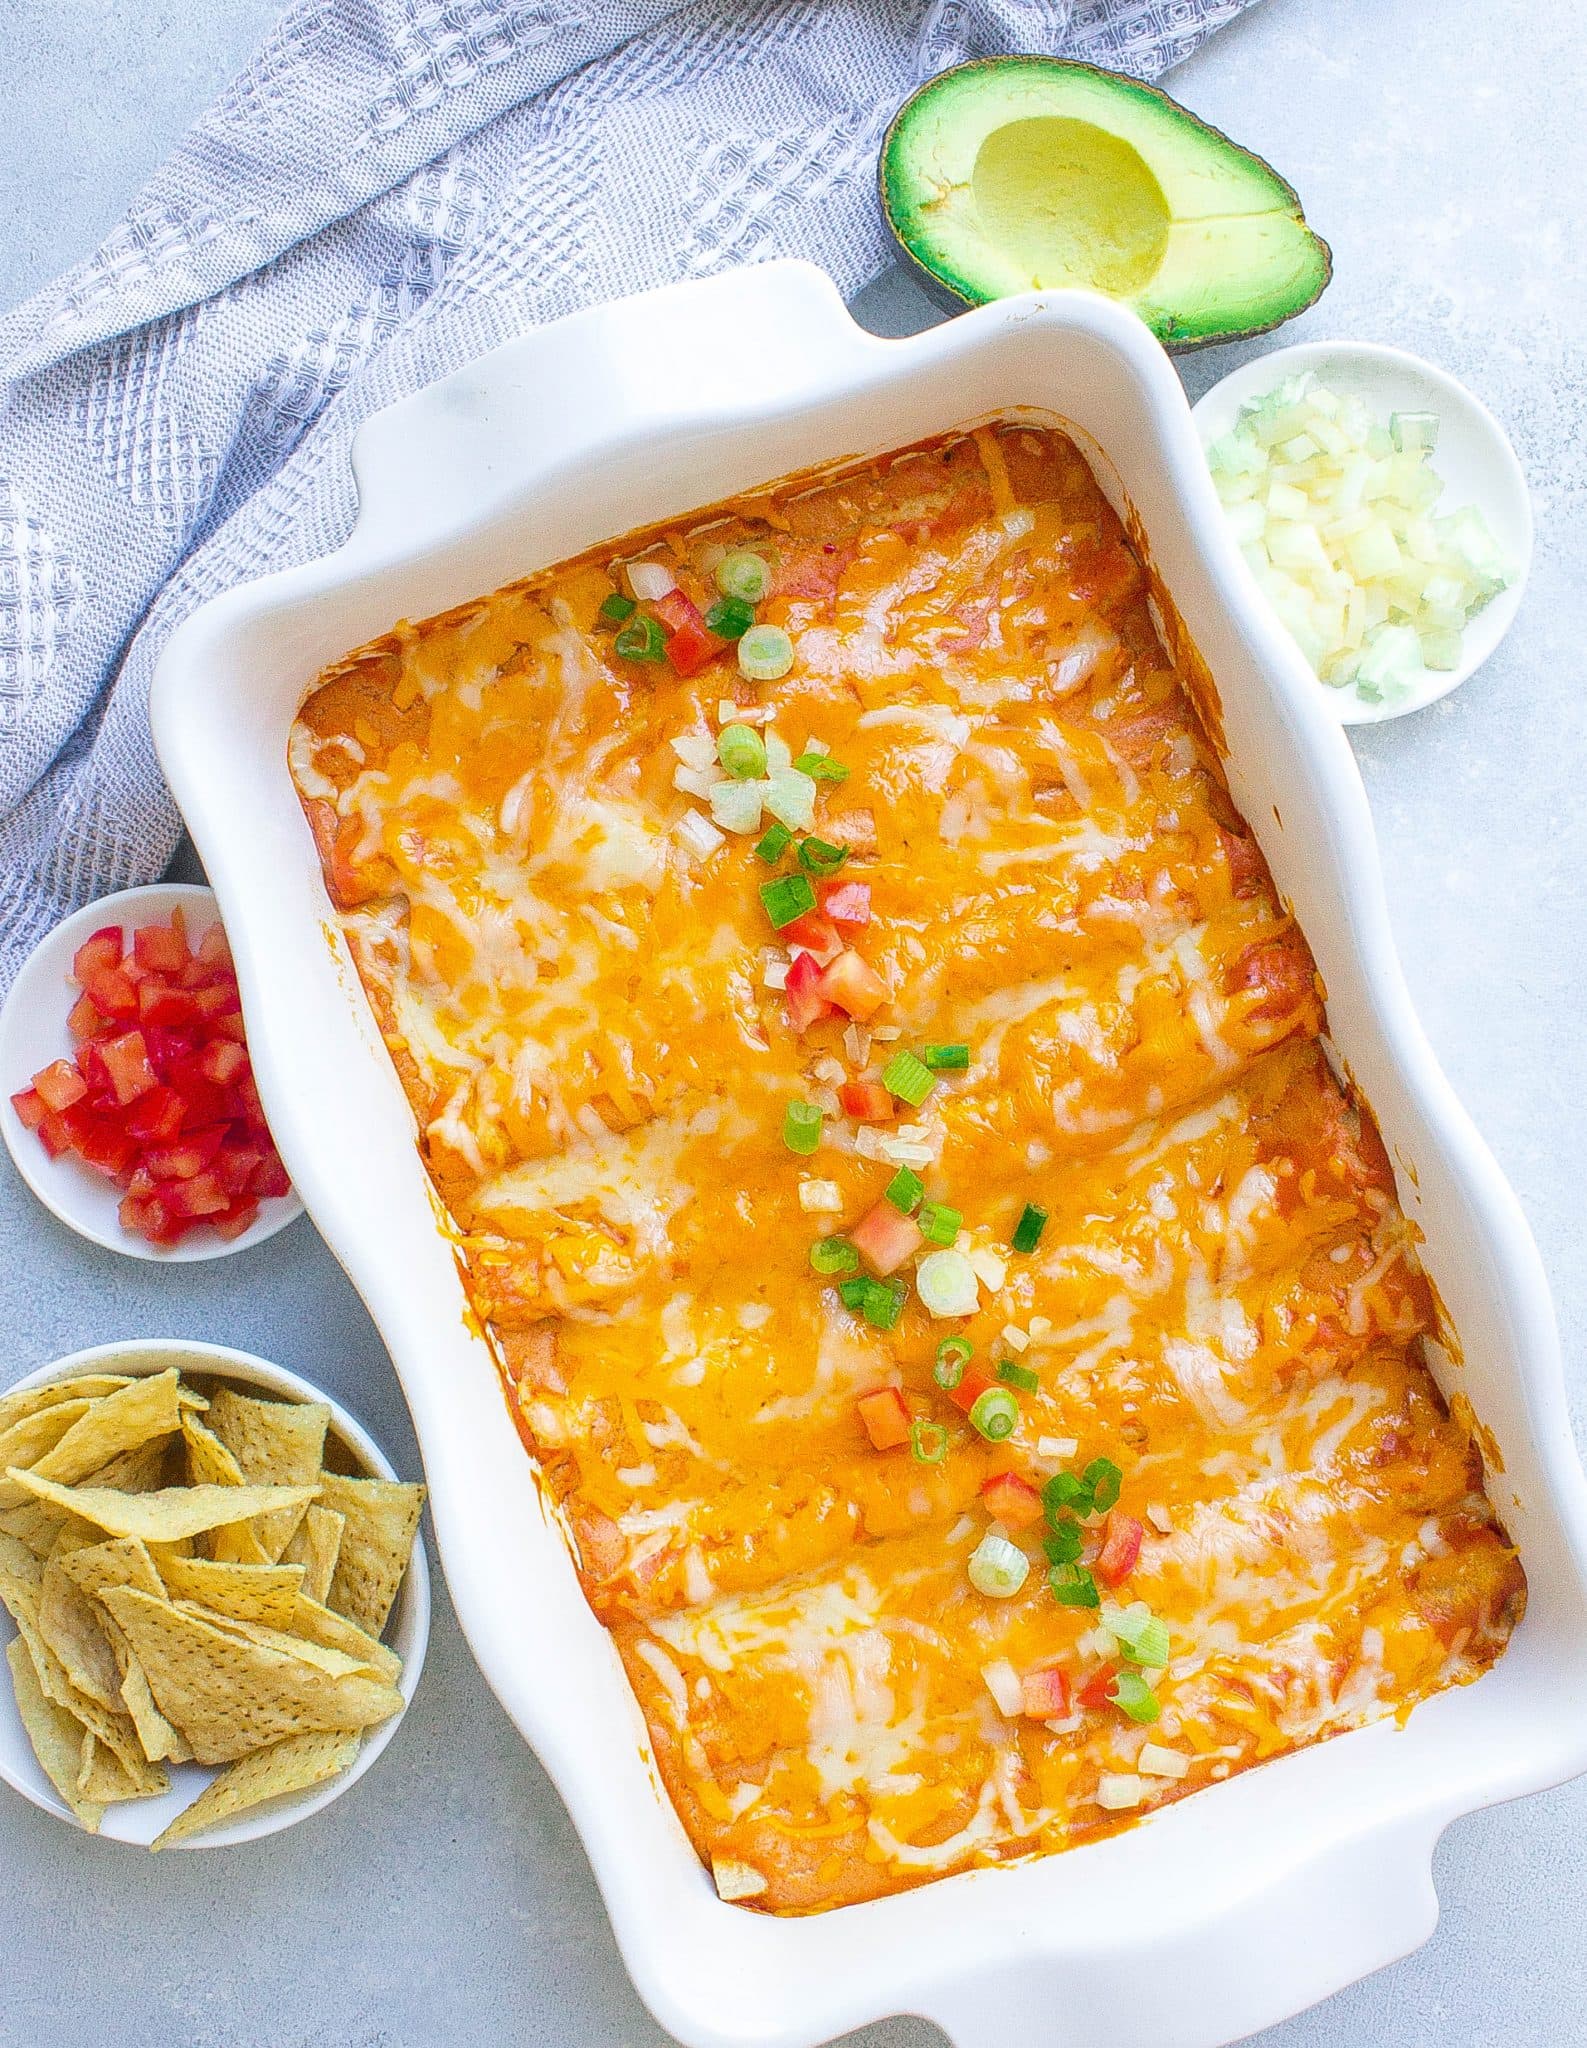 THE BEST Cheese Enchilada Recipe (Easy & Made In 30 Minutes)